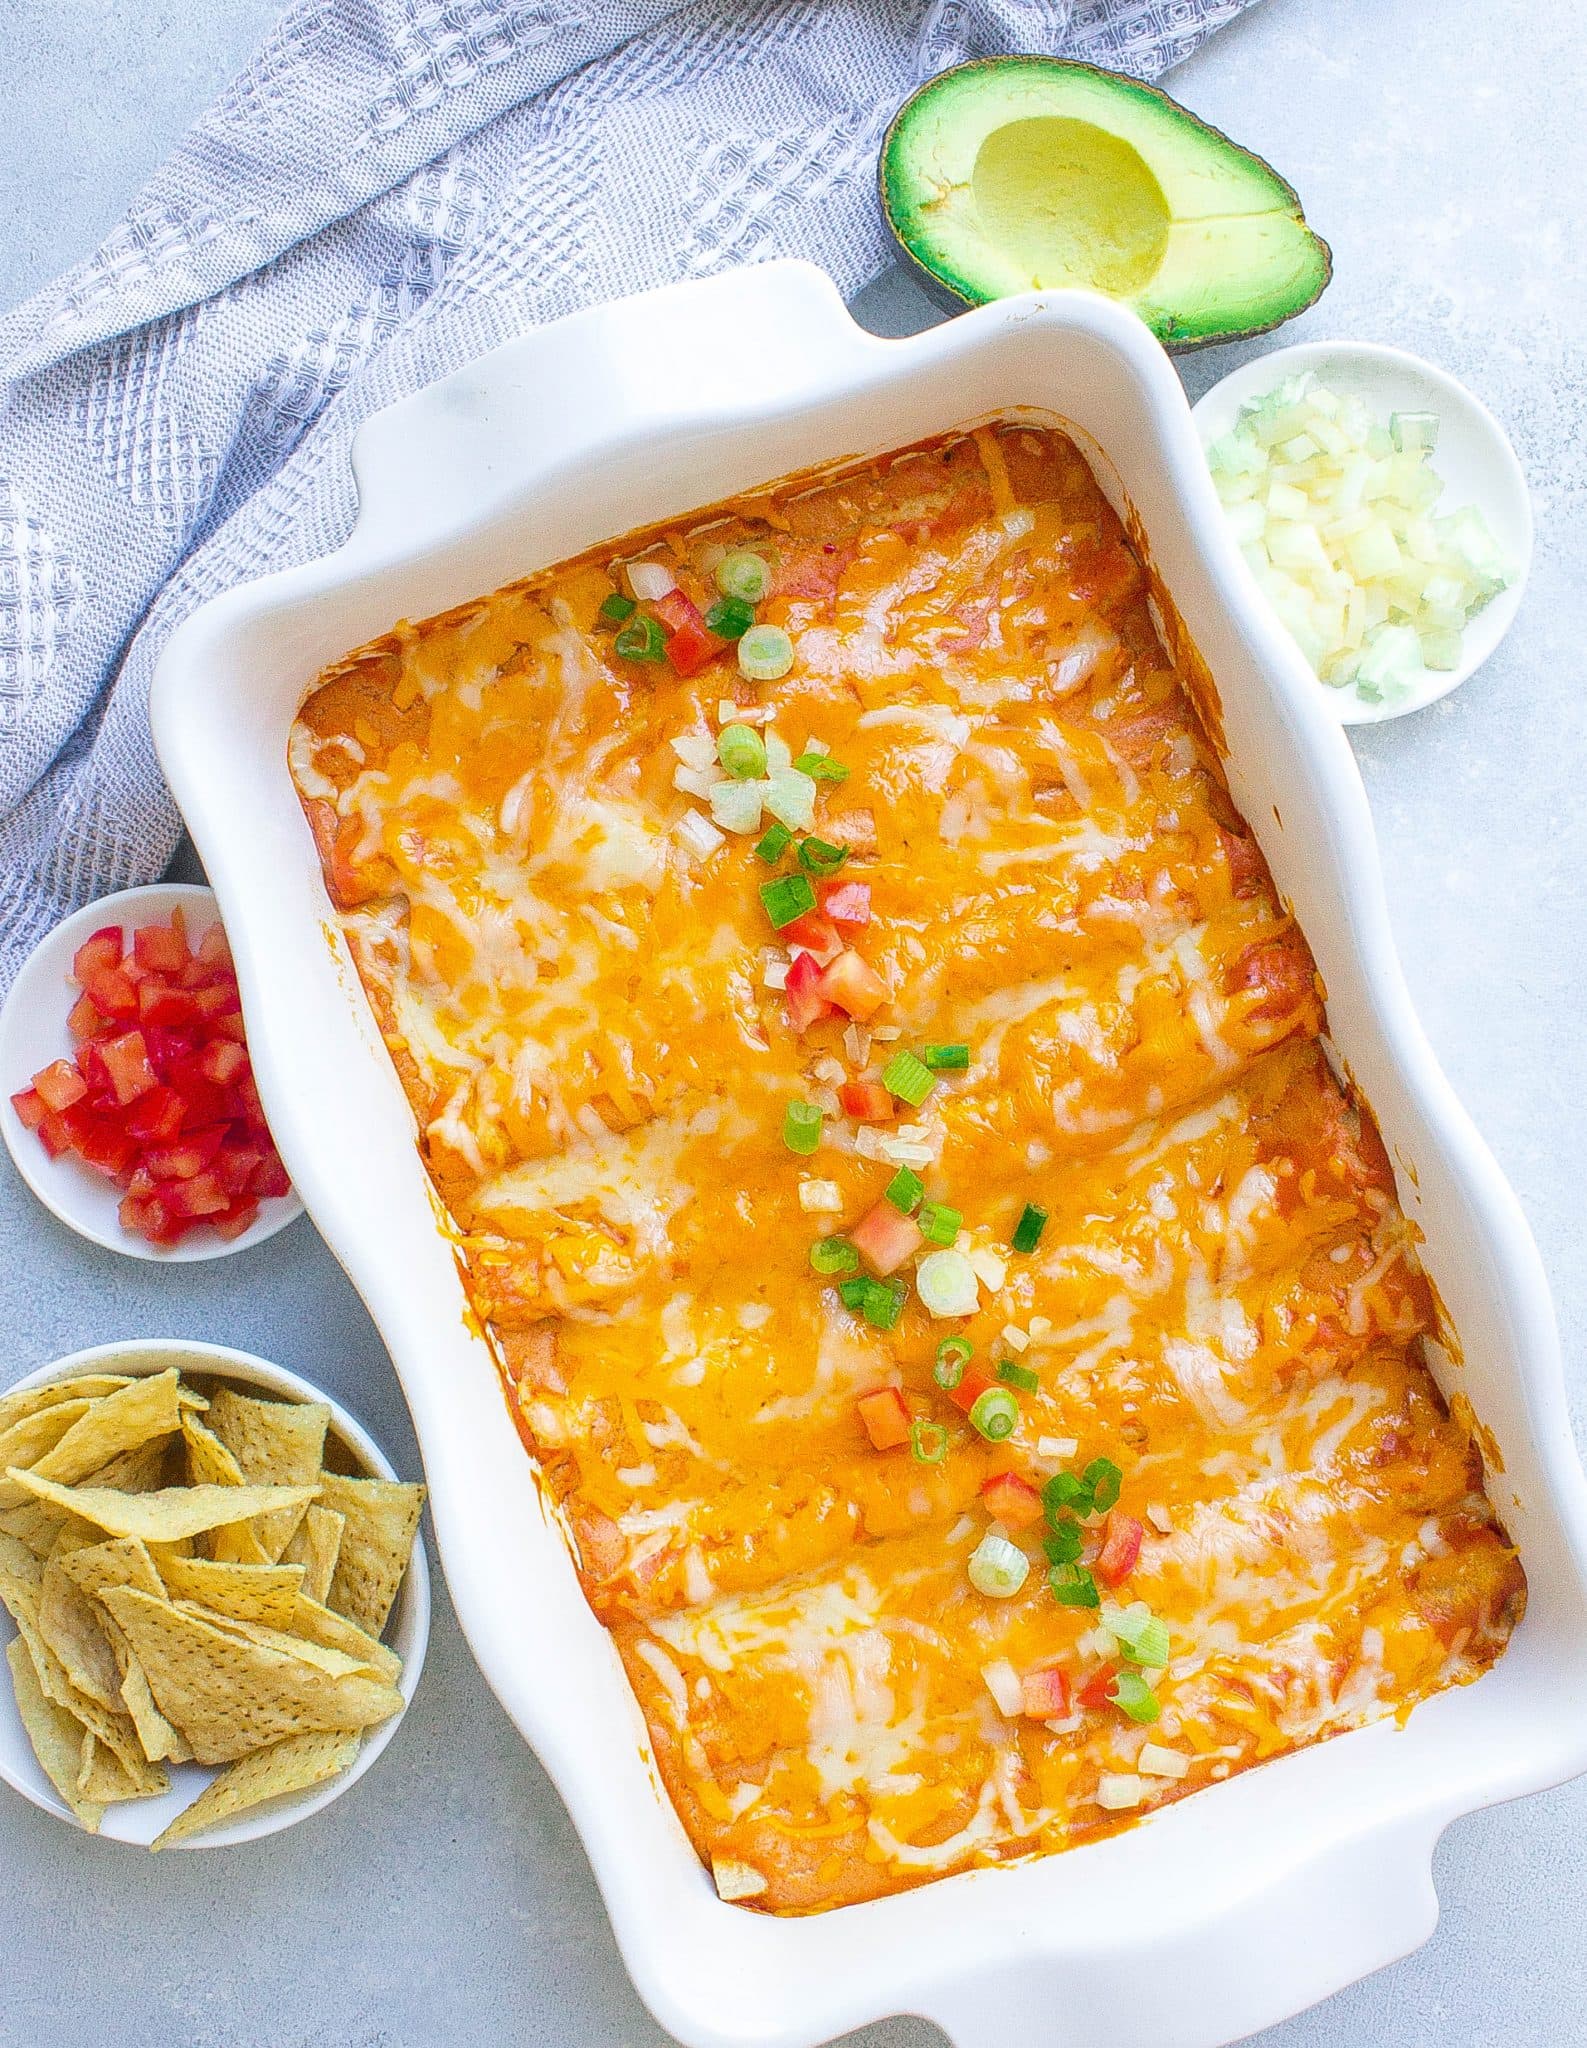 THE BEST Cheese Enchilada Recipe (Easy & Made In 30 Minutes)